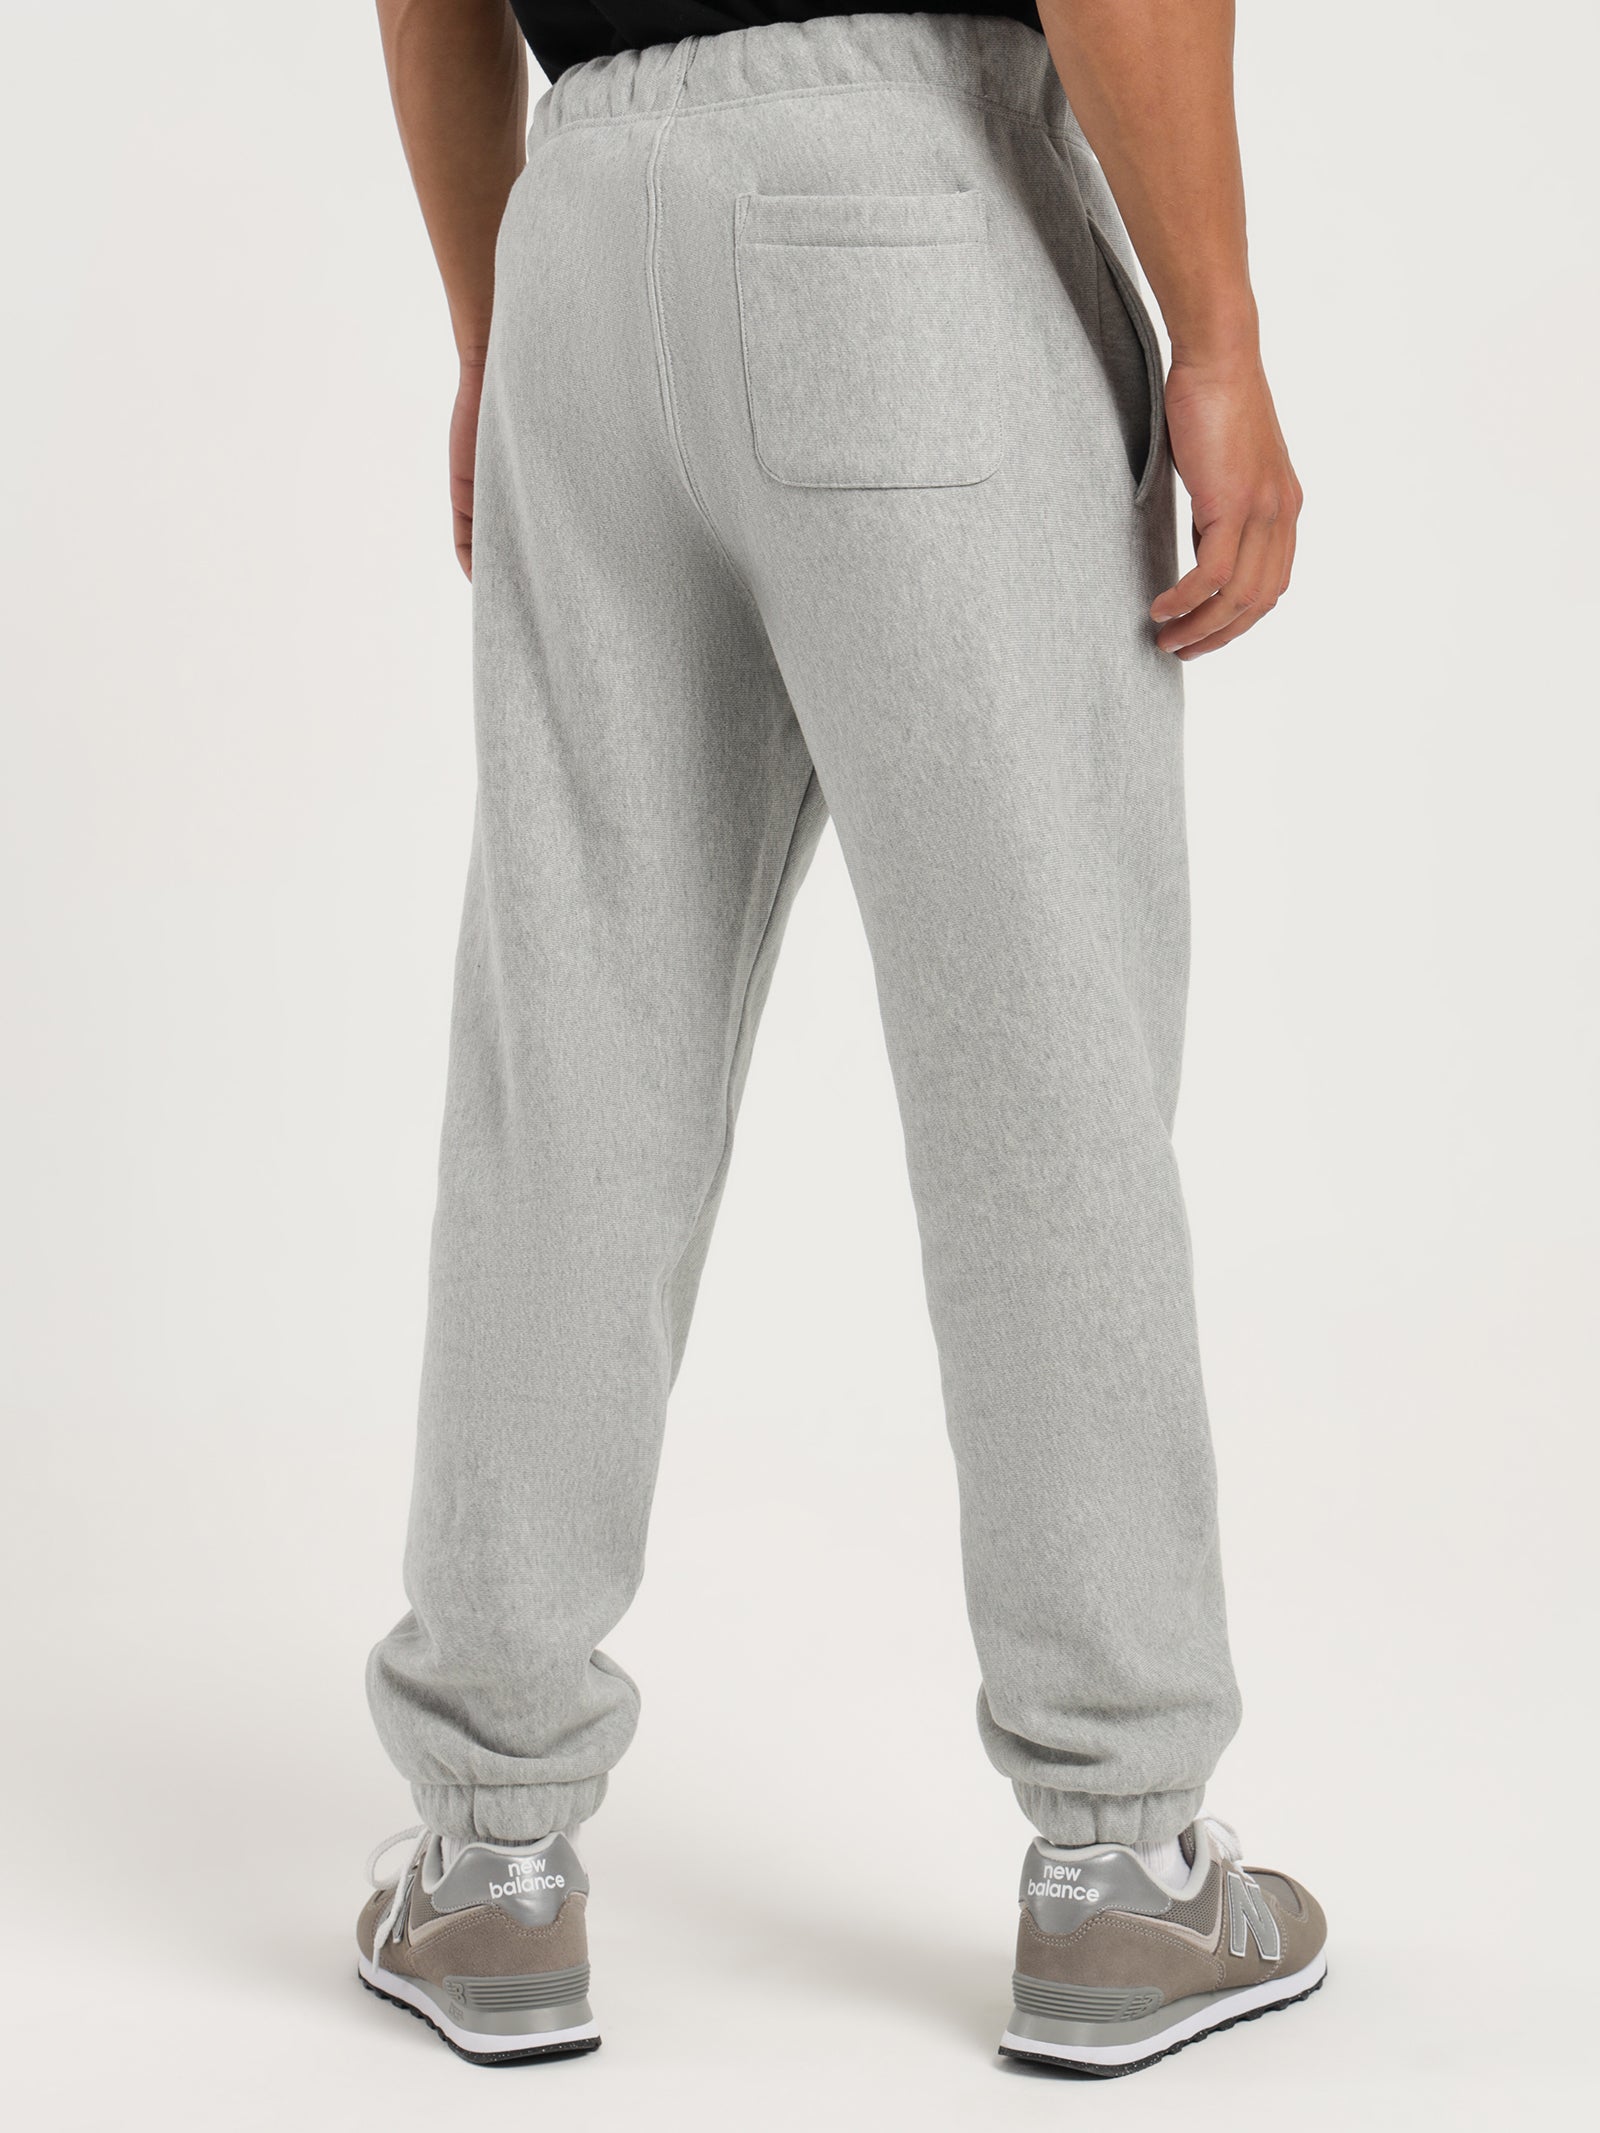 Reverse Weave Trackpant in Grey Marle